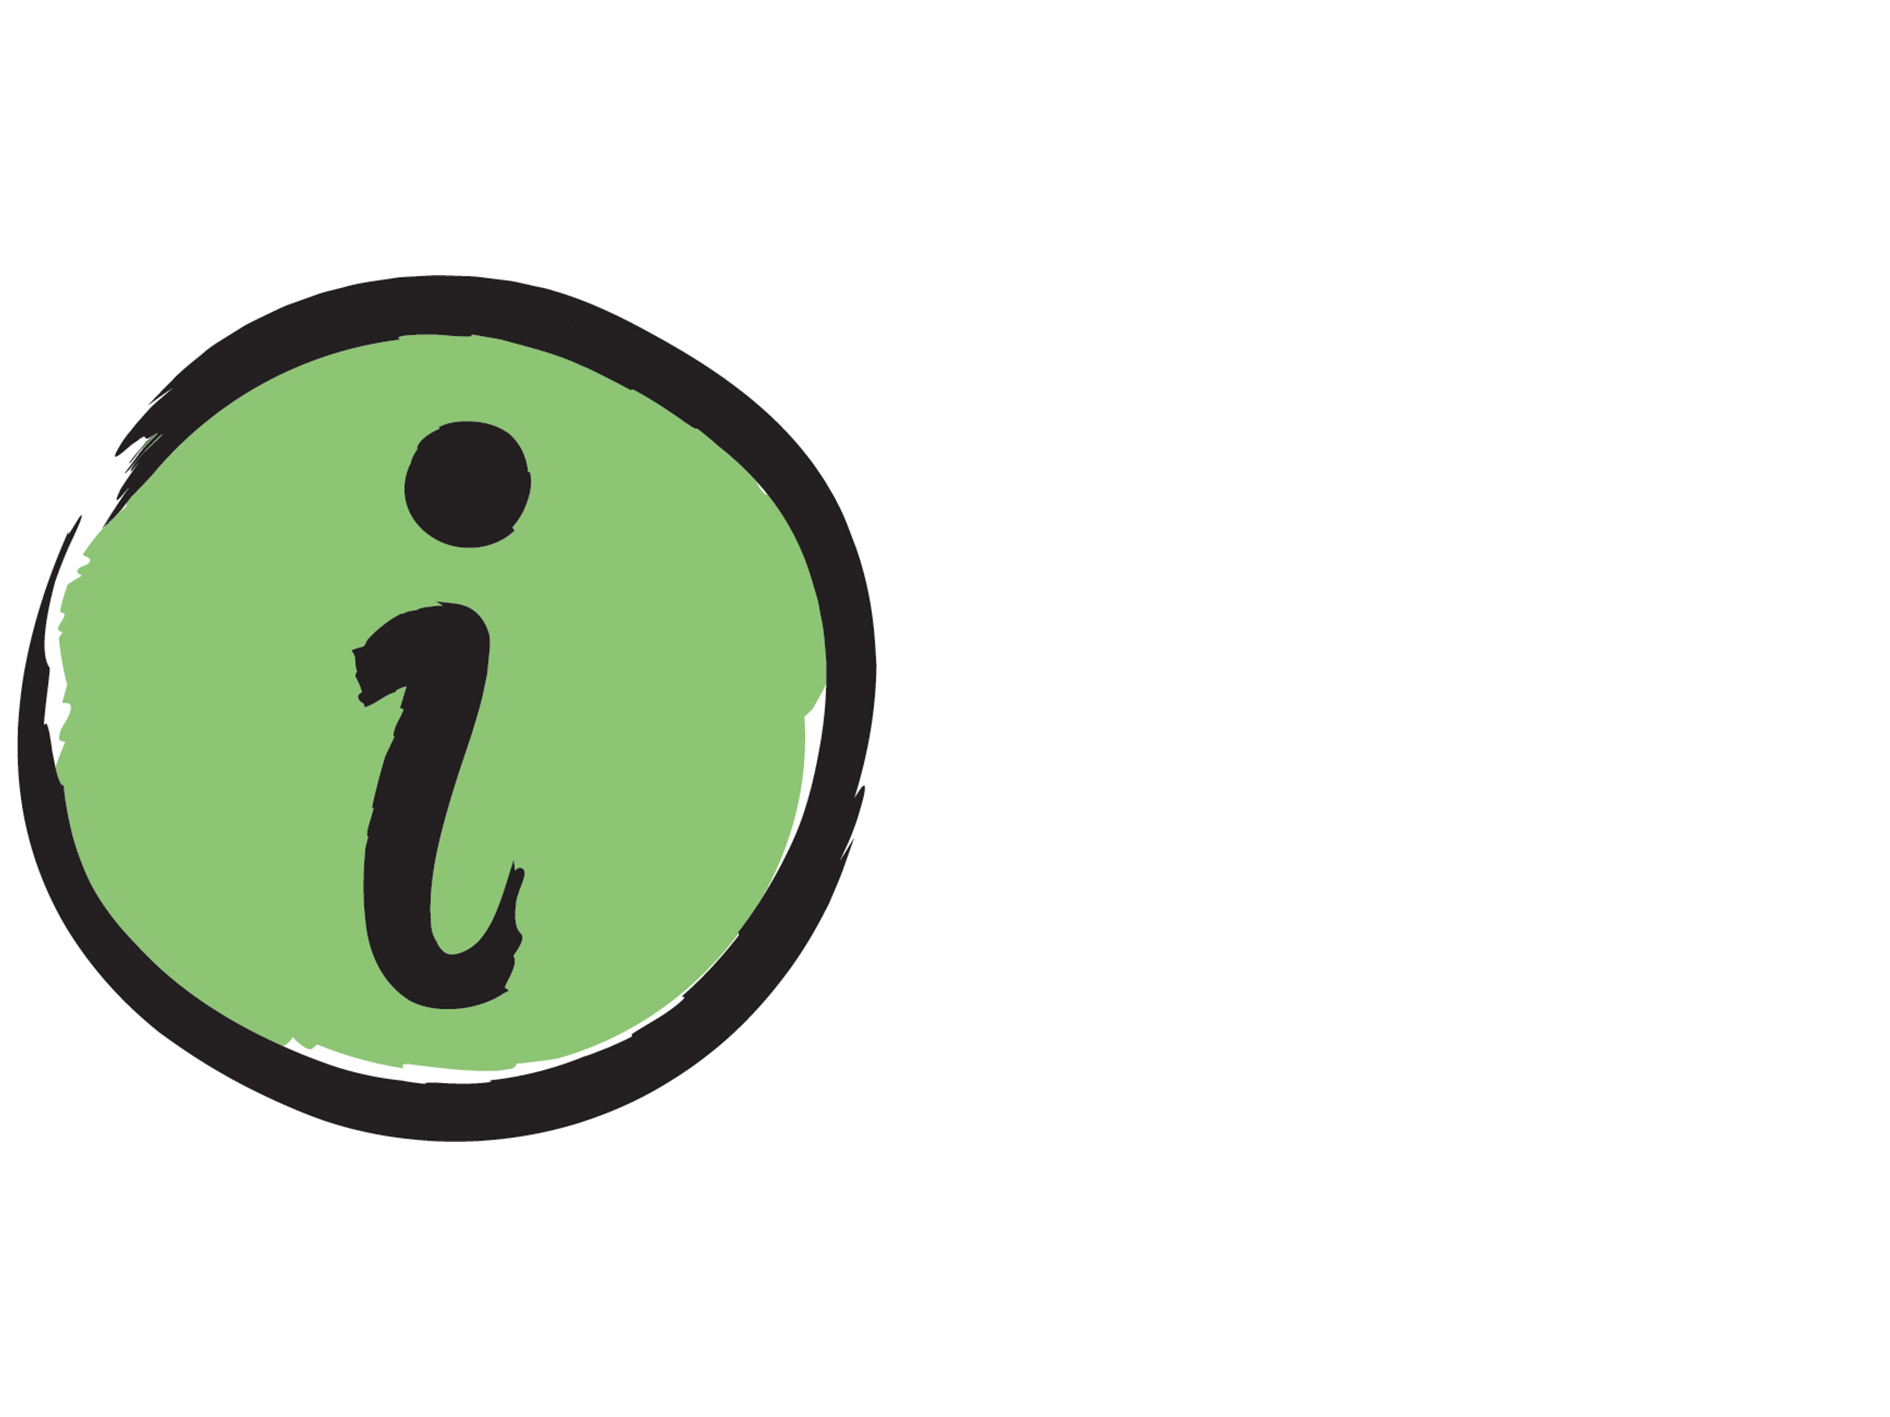 An icon of the letter “I” representing information.